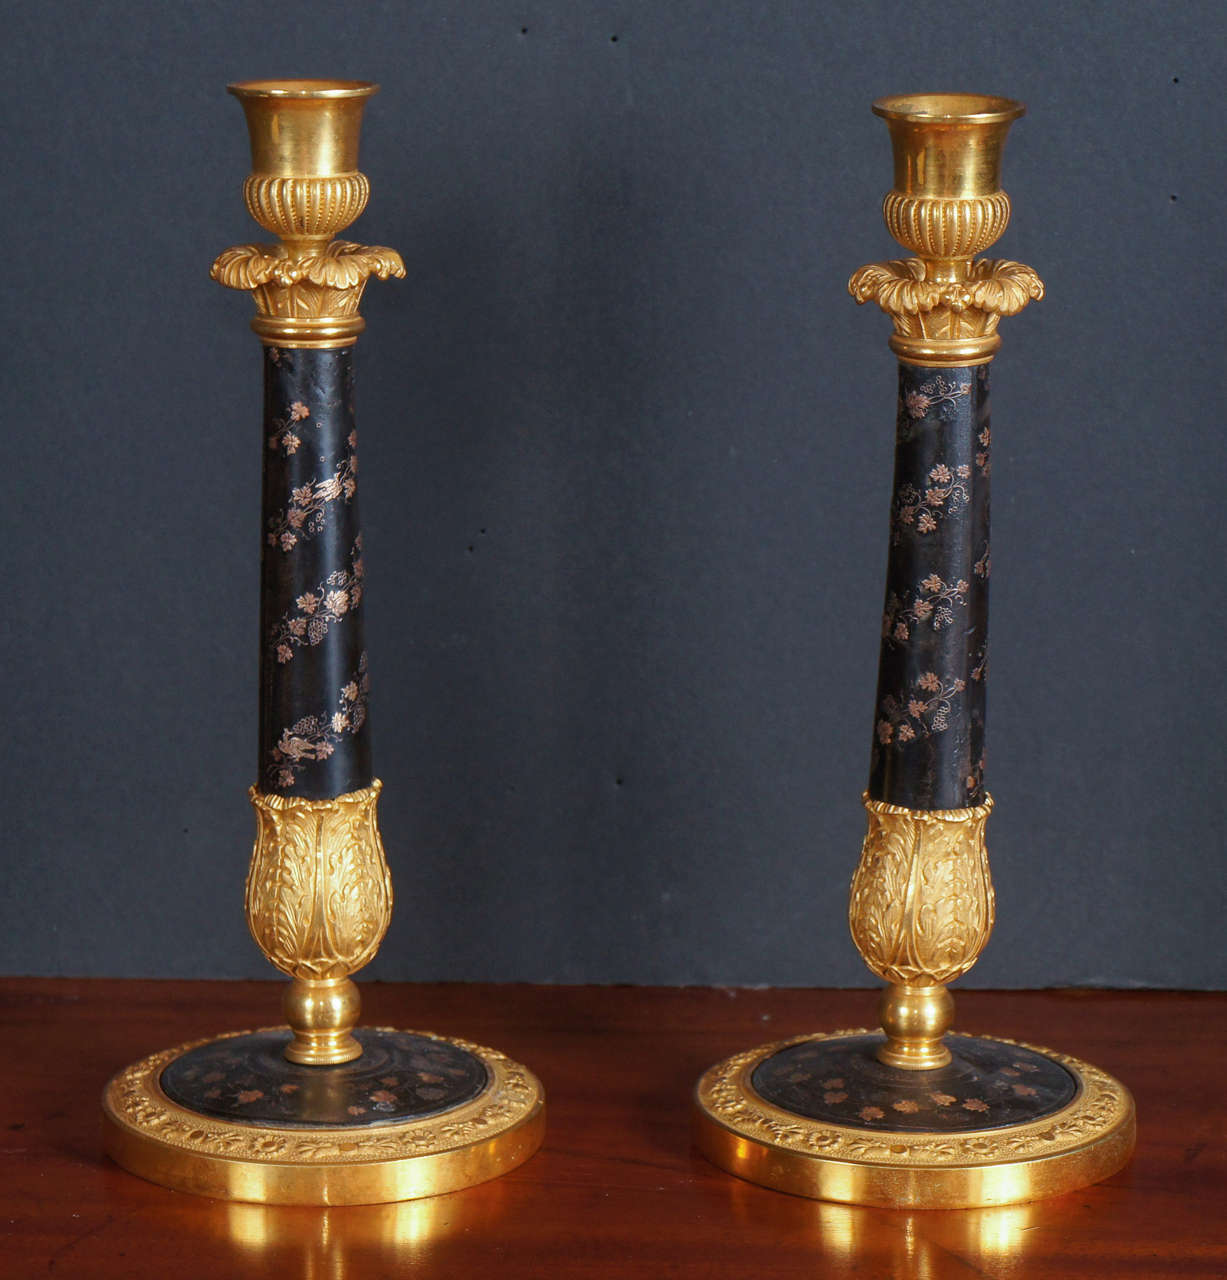 This fine pair of candle sticks made in France during the rein of Charles X,  circa 1820  represent the high style nature of goods made in the Pala royale district of Paris during the time. The casting is fine and very detailed and the extravagantly